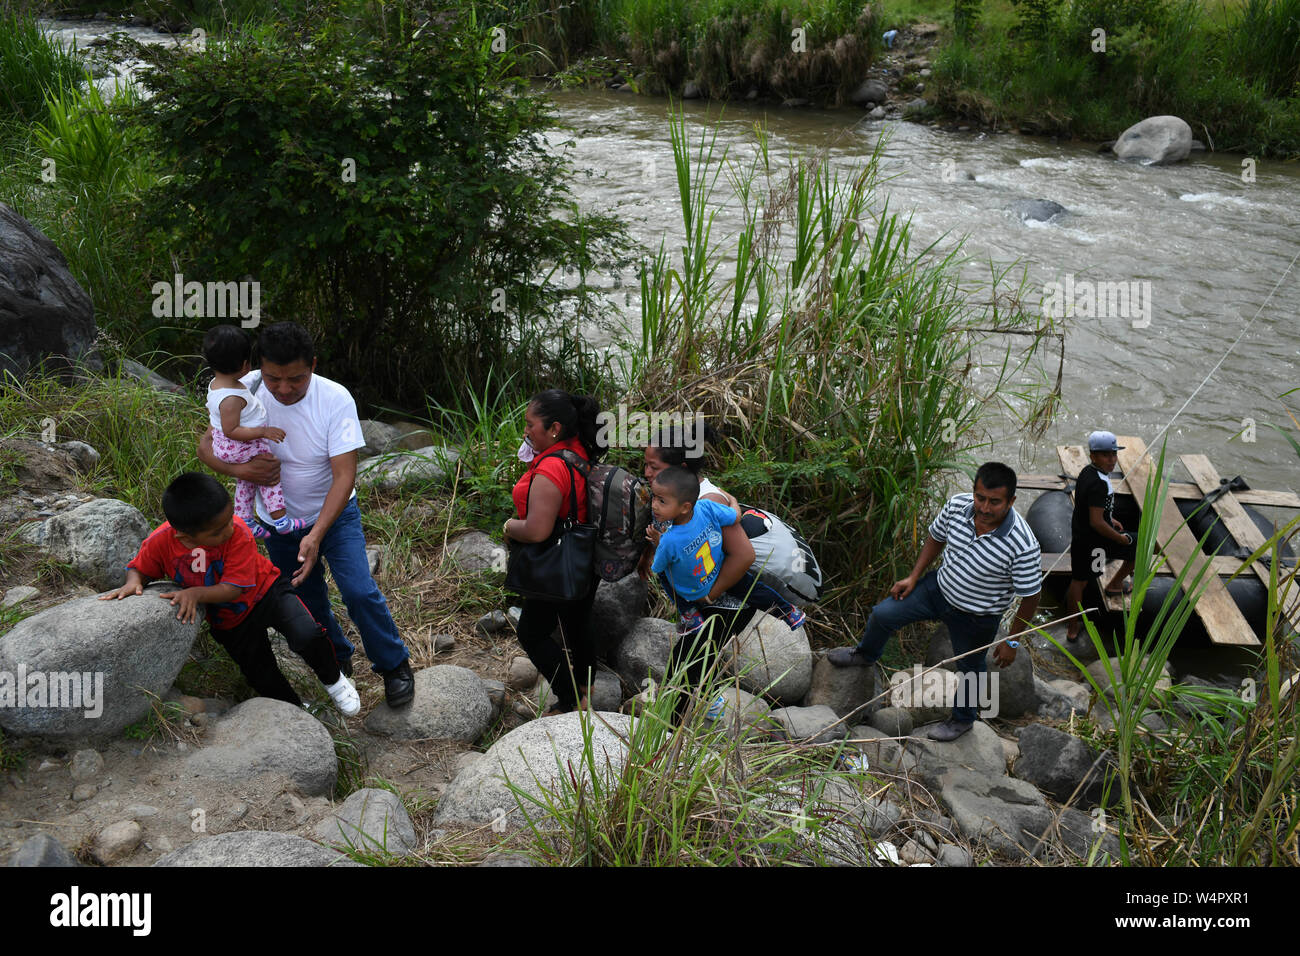 July 24, 2019, Talisman, Chiapas, Mexico: Central American families cross illegally into Mexico on a tube boat from El Carmen town into Talisman Wednesday. The migrants pay 50 cents per person, and dozen cross illegally every day, even as the administration of Mexican President Lopez Obrador claims to have reduced the flow of migrants heading to the US by more than 36% last month. Frustrated Mexican marines and immigration officers say that they have been reduced to observers, since they lack the judiciary tools to address the issue and even weapons to defend themselves against smugglers and Stock Photo